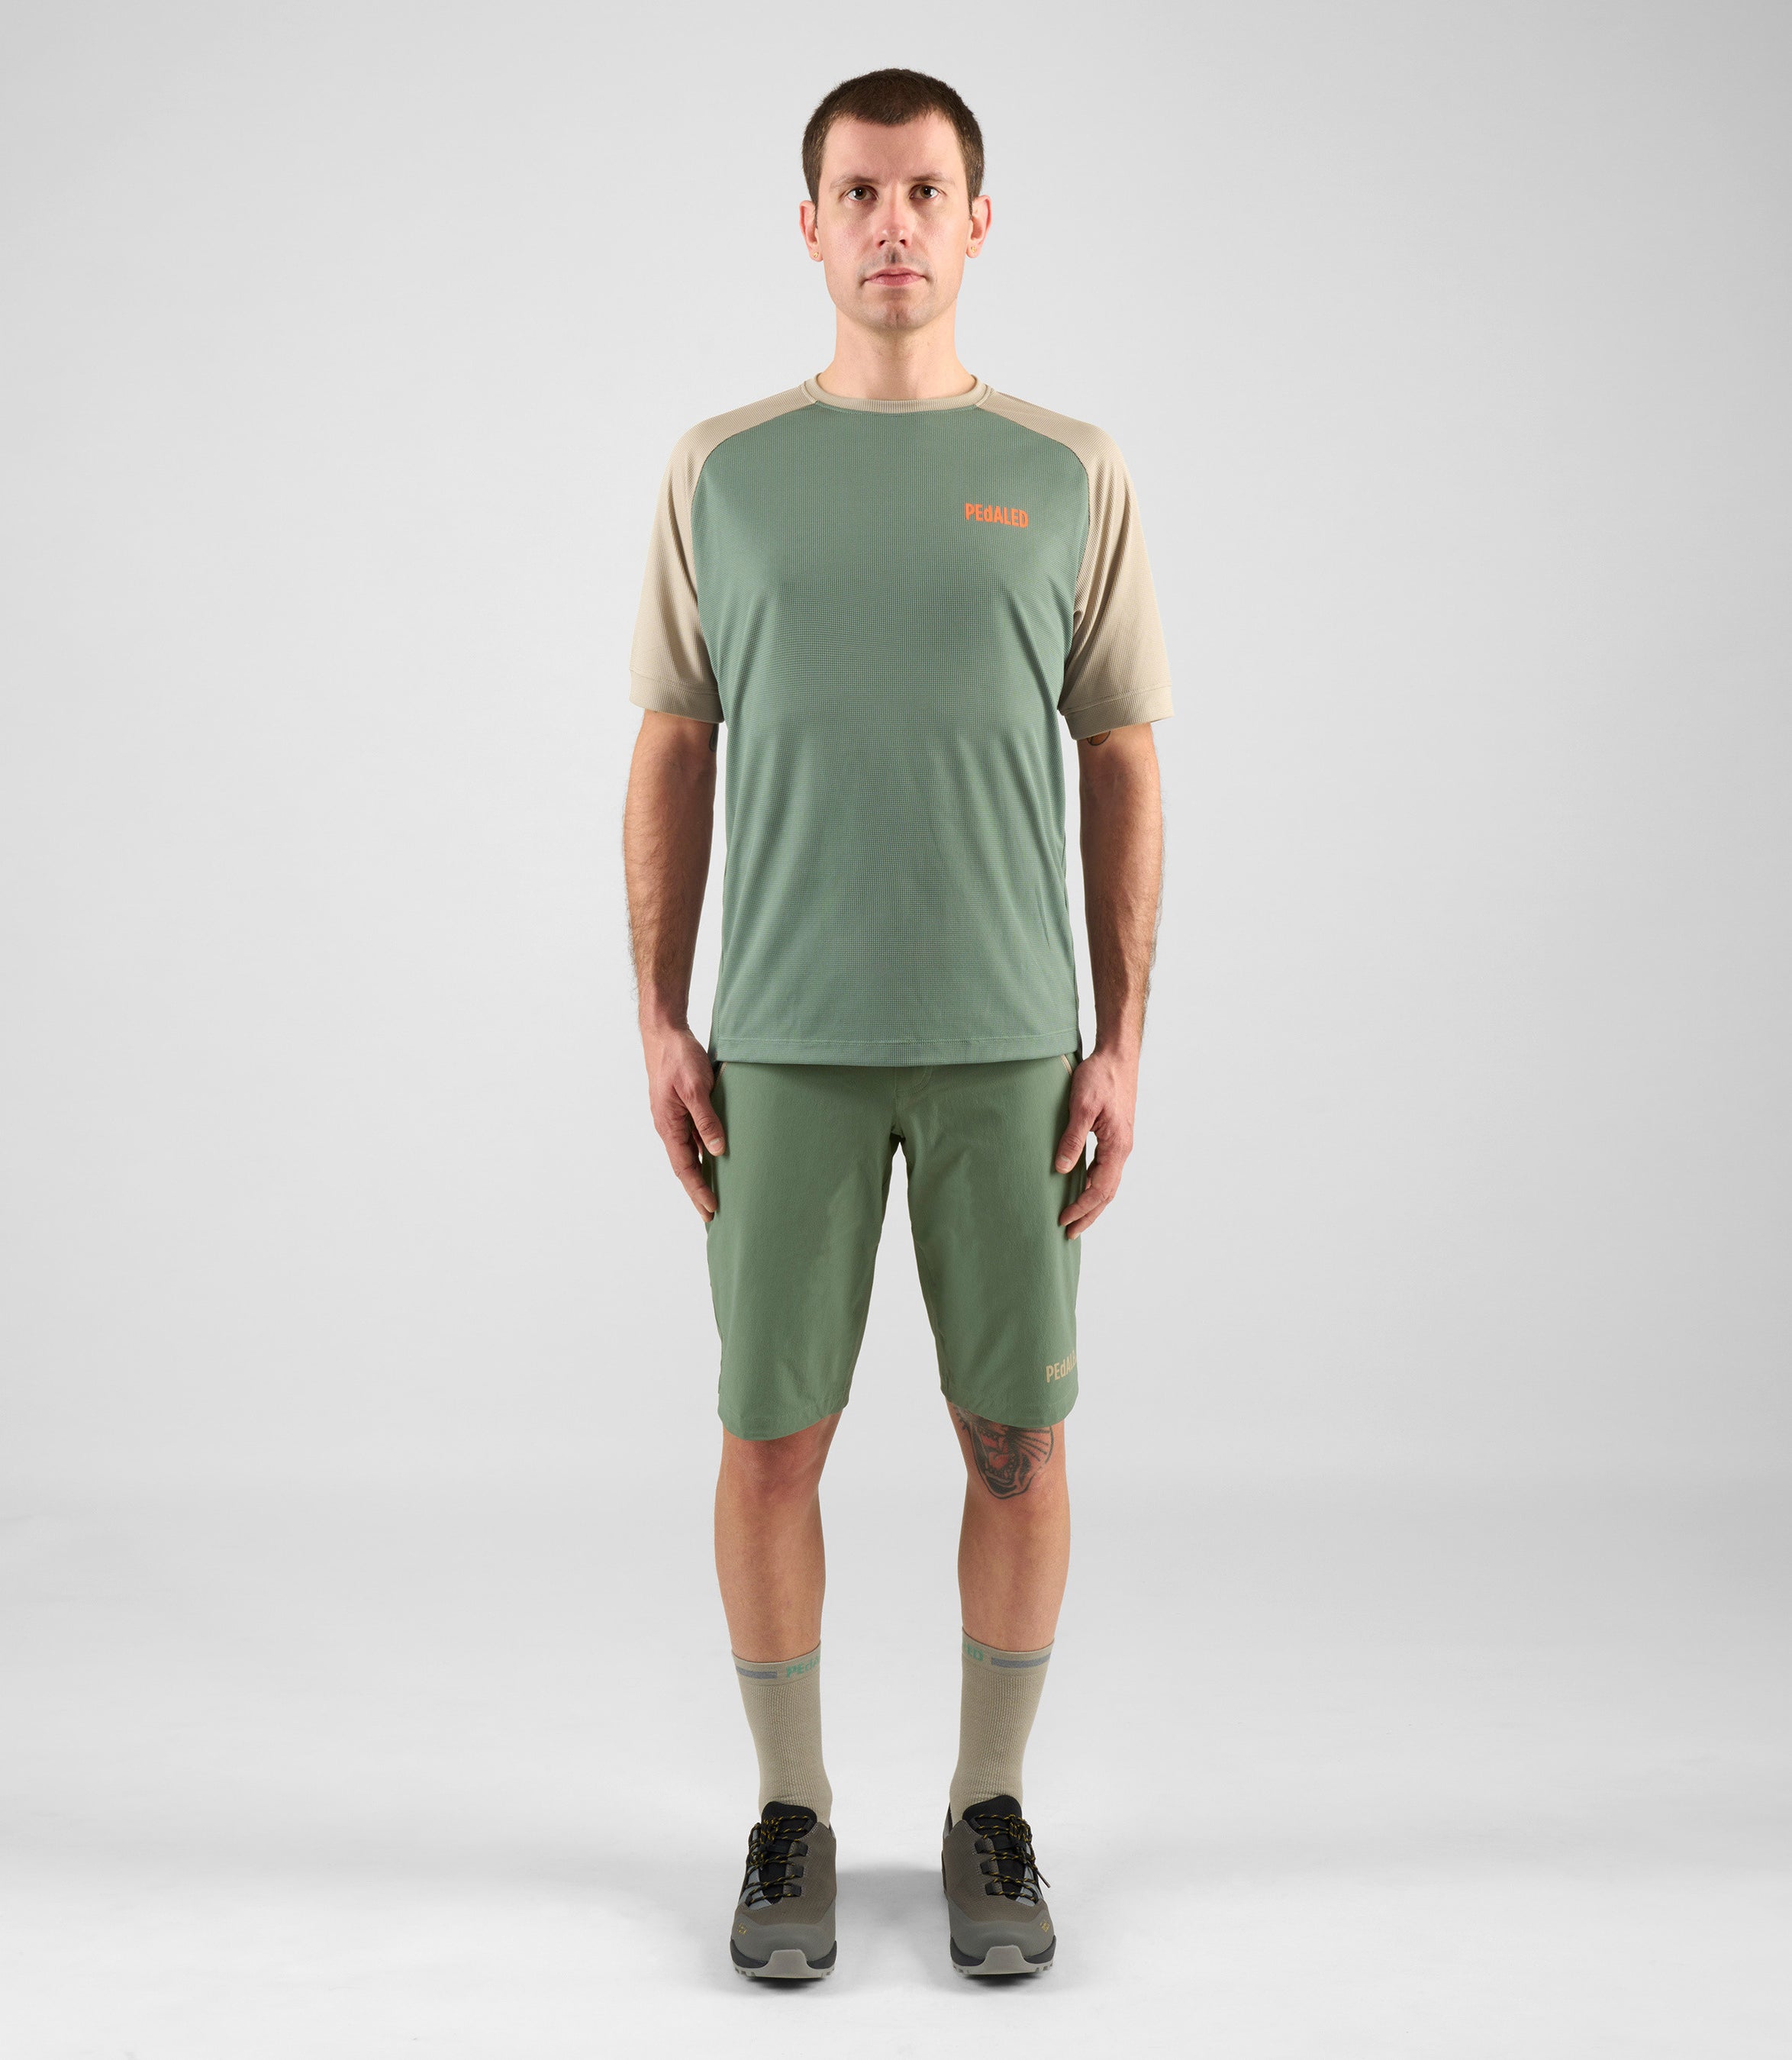 24SSHYA62PE_3_men cycling shorts olive green yama total body front pedaled